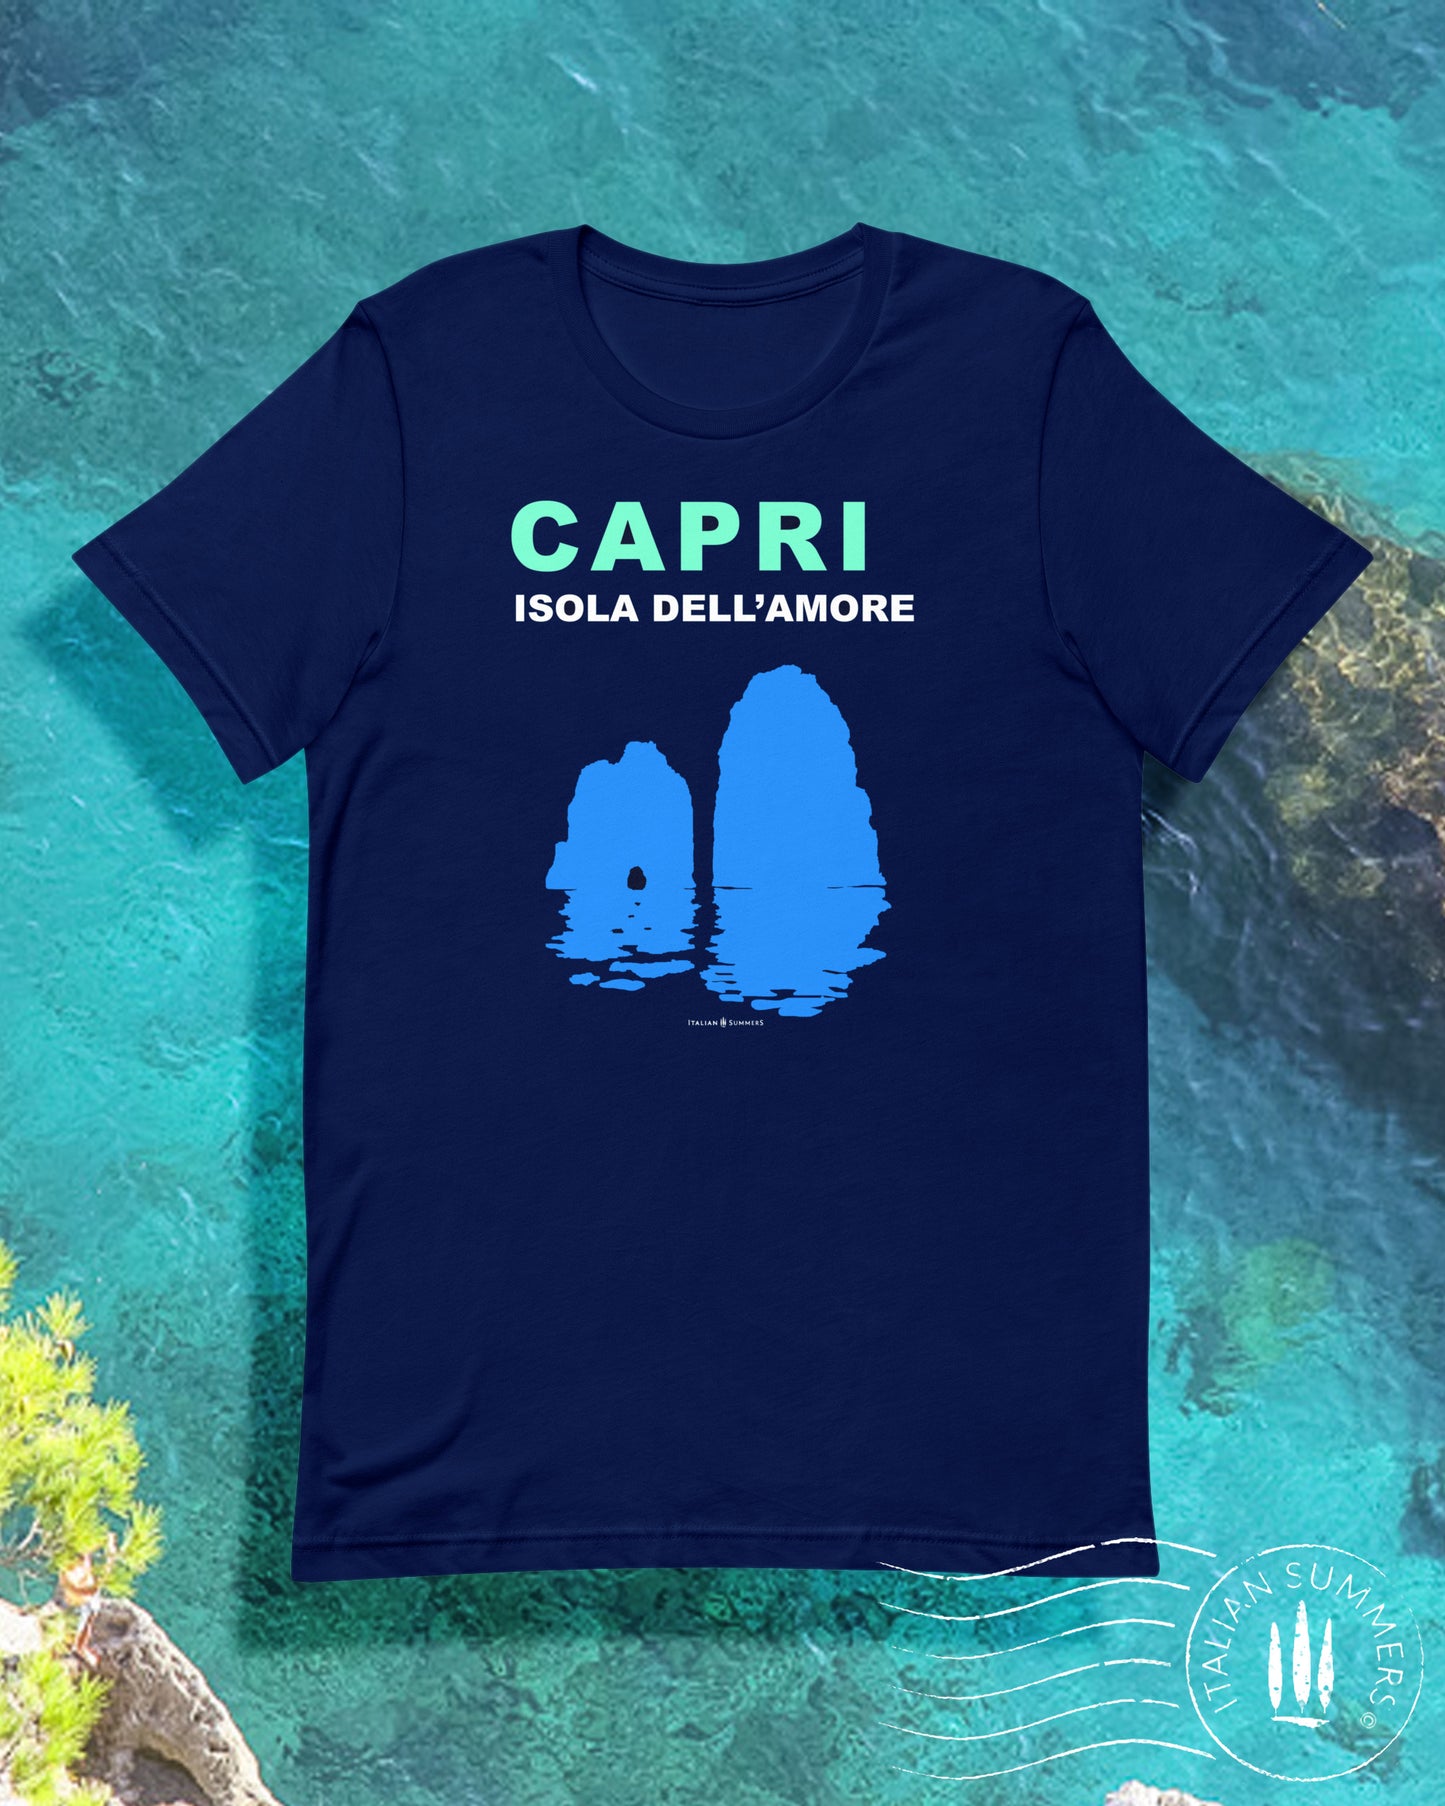 Italy inspired garment dyed T shirt with the aqua and white text: CAPRI, Isola dell'Amore (Capri, Iland of Love) with the silhouette  of the famous Faraglioni and their reflection upon the waters of the Mediterranean Sea. Made by Italian Summers